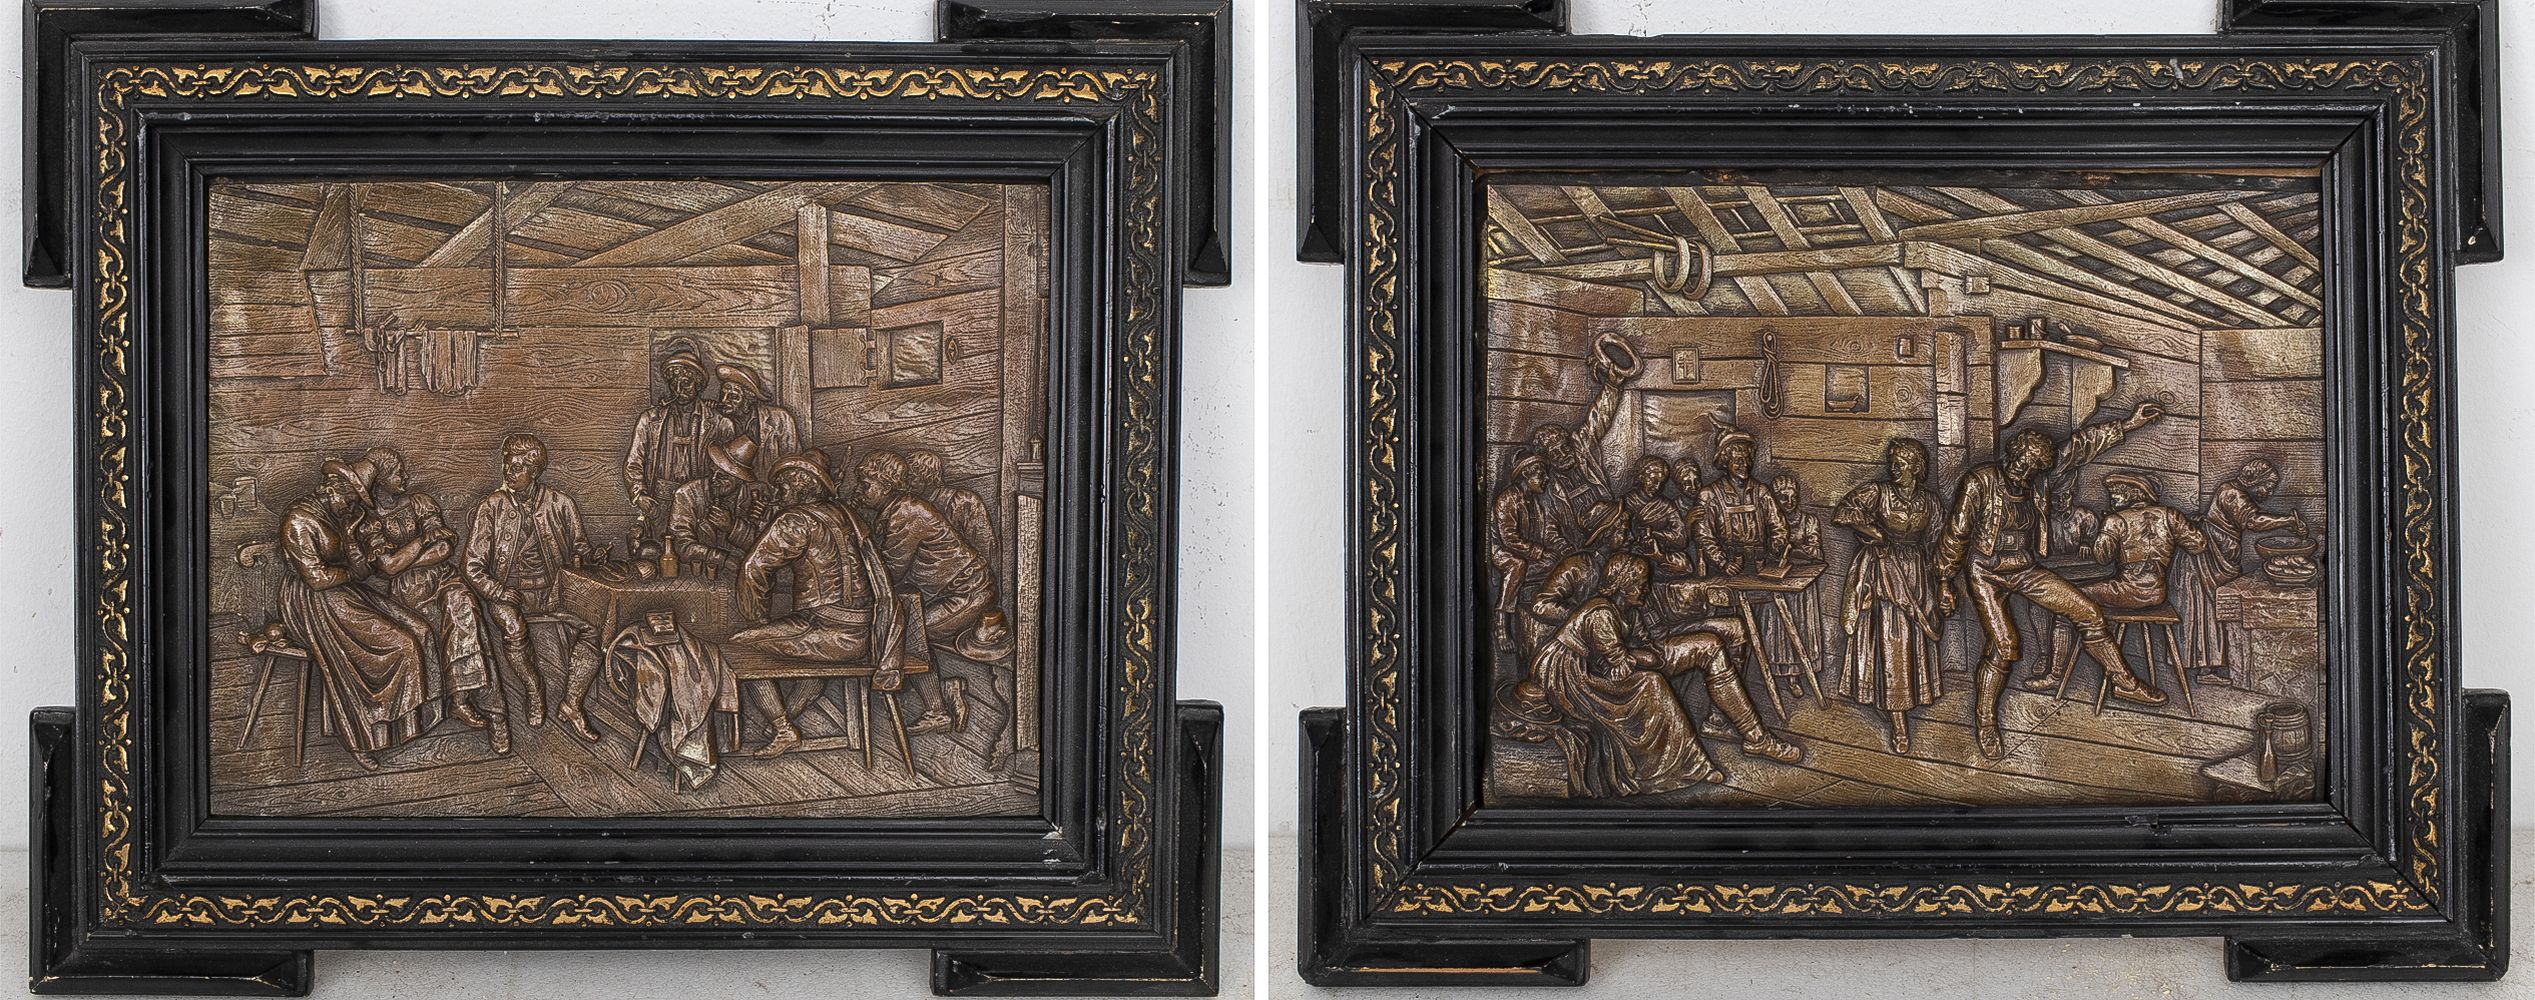 CONTINENTAL FRAMED RELIEF PUB SCENES  3c5593